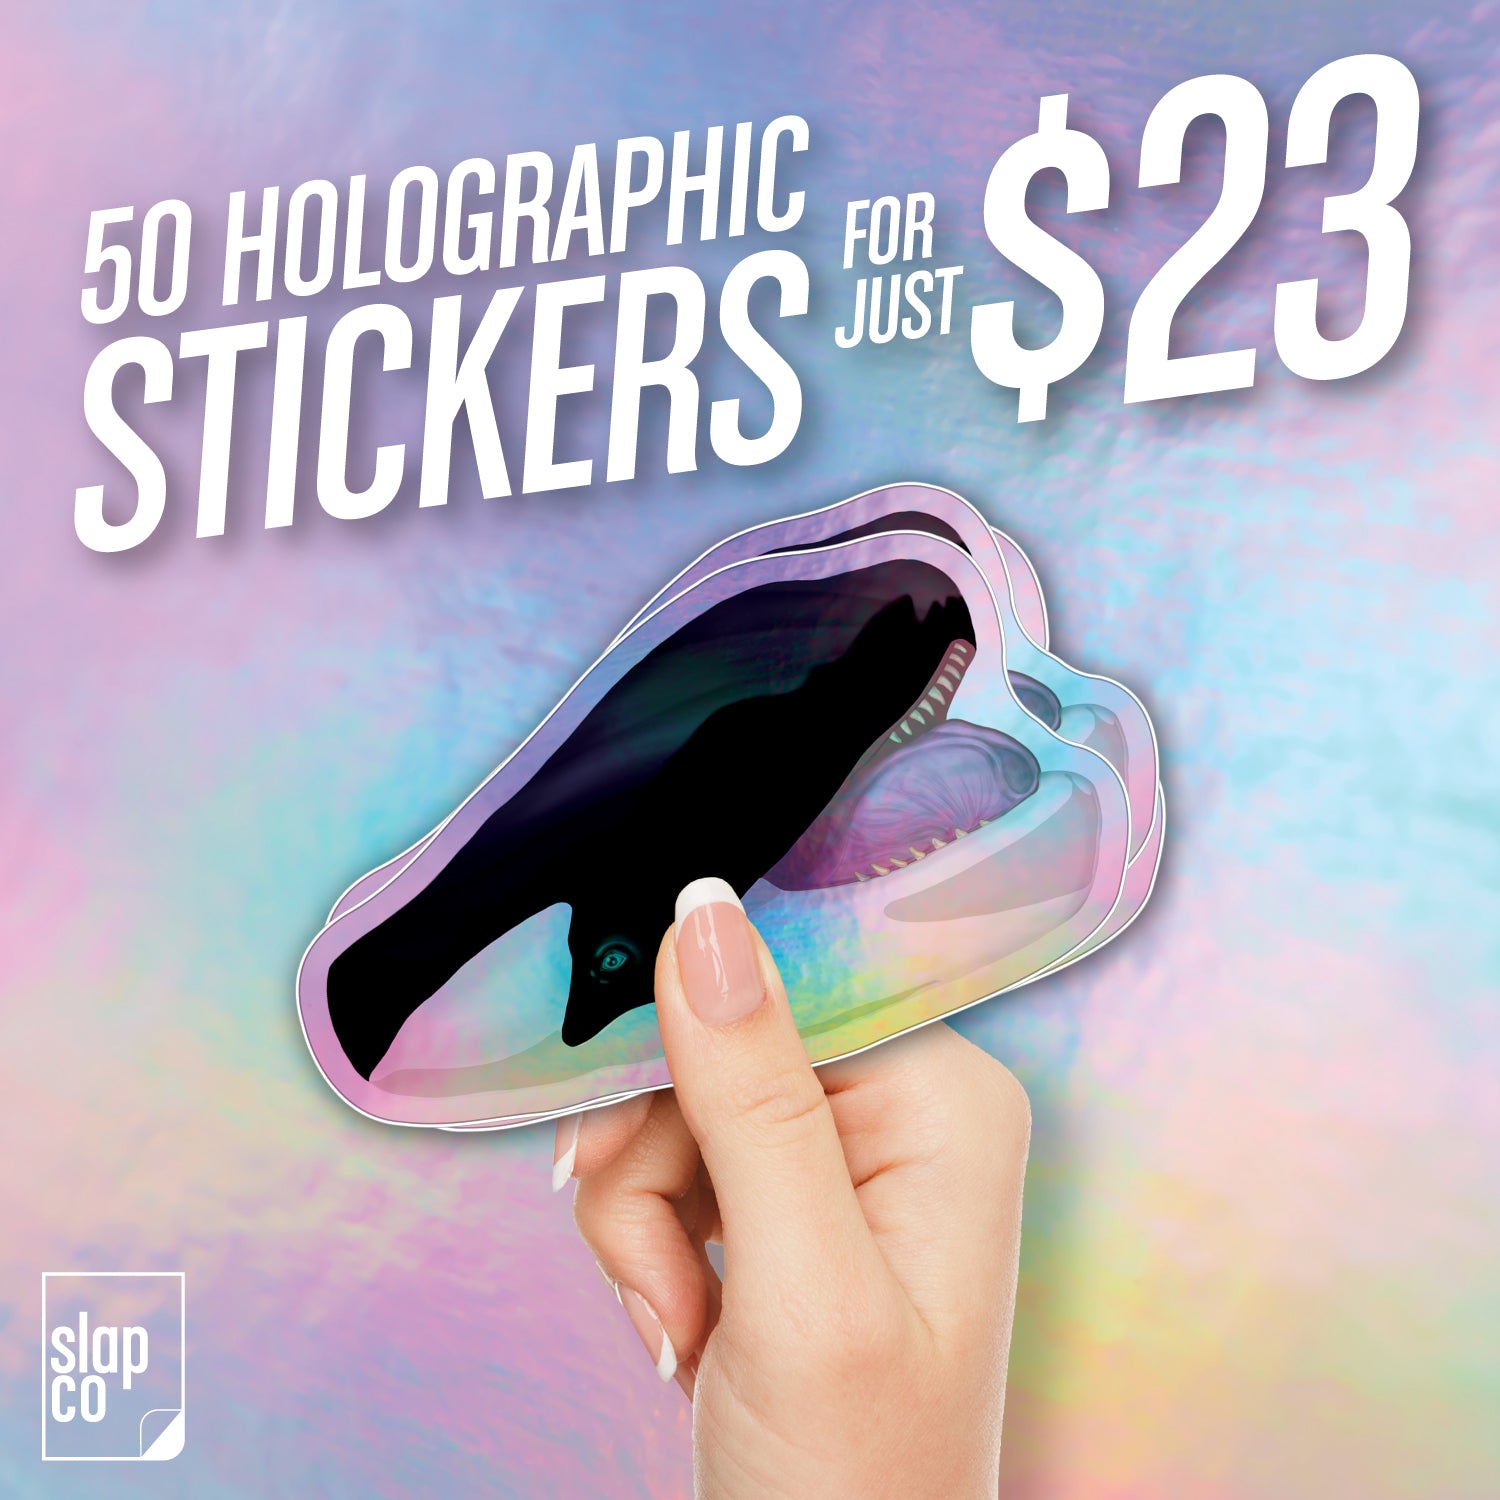 50 Holographic Stickers for $23 - Includes FREE US Shipping!